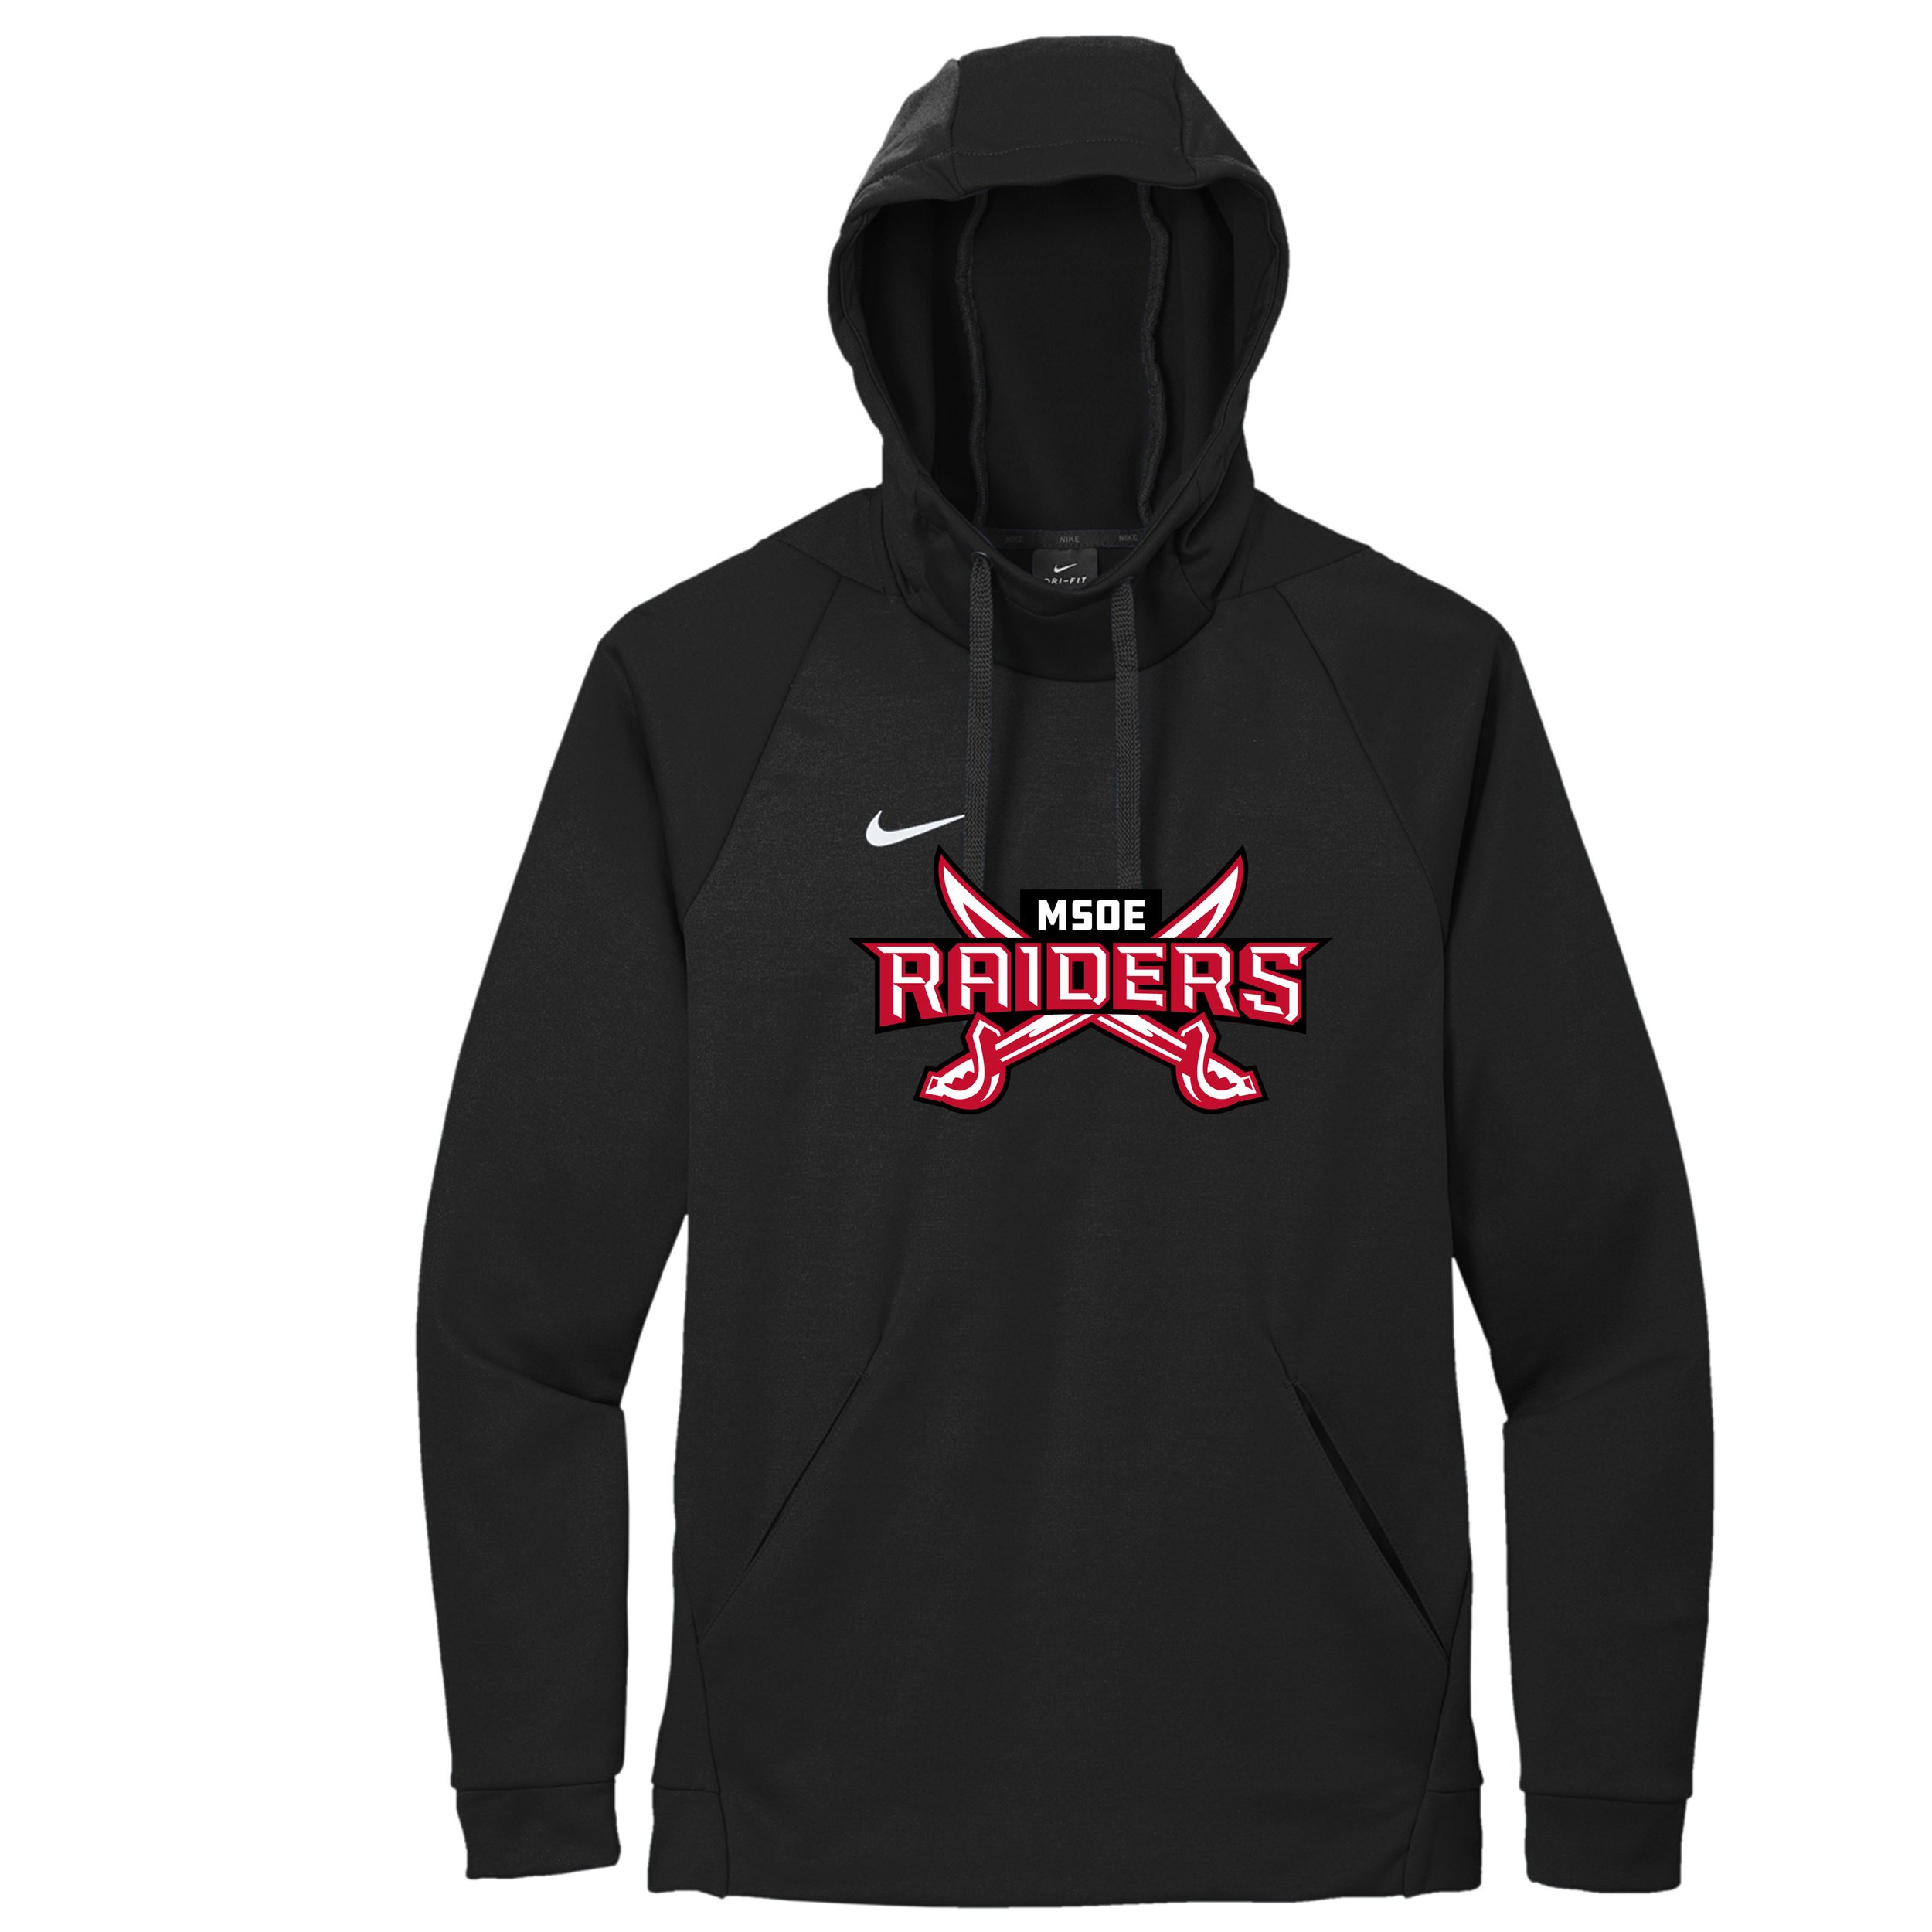 MSOE Volleyball Raiders Nike hoodie — T Shirts Your Way